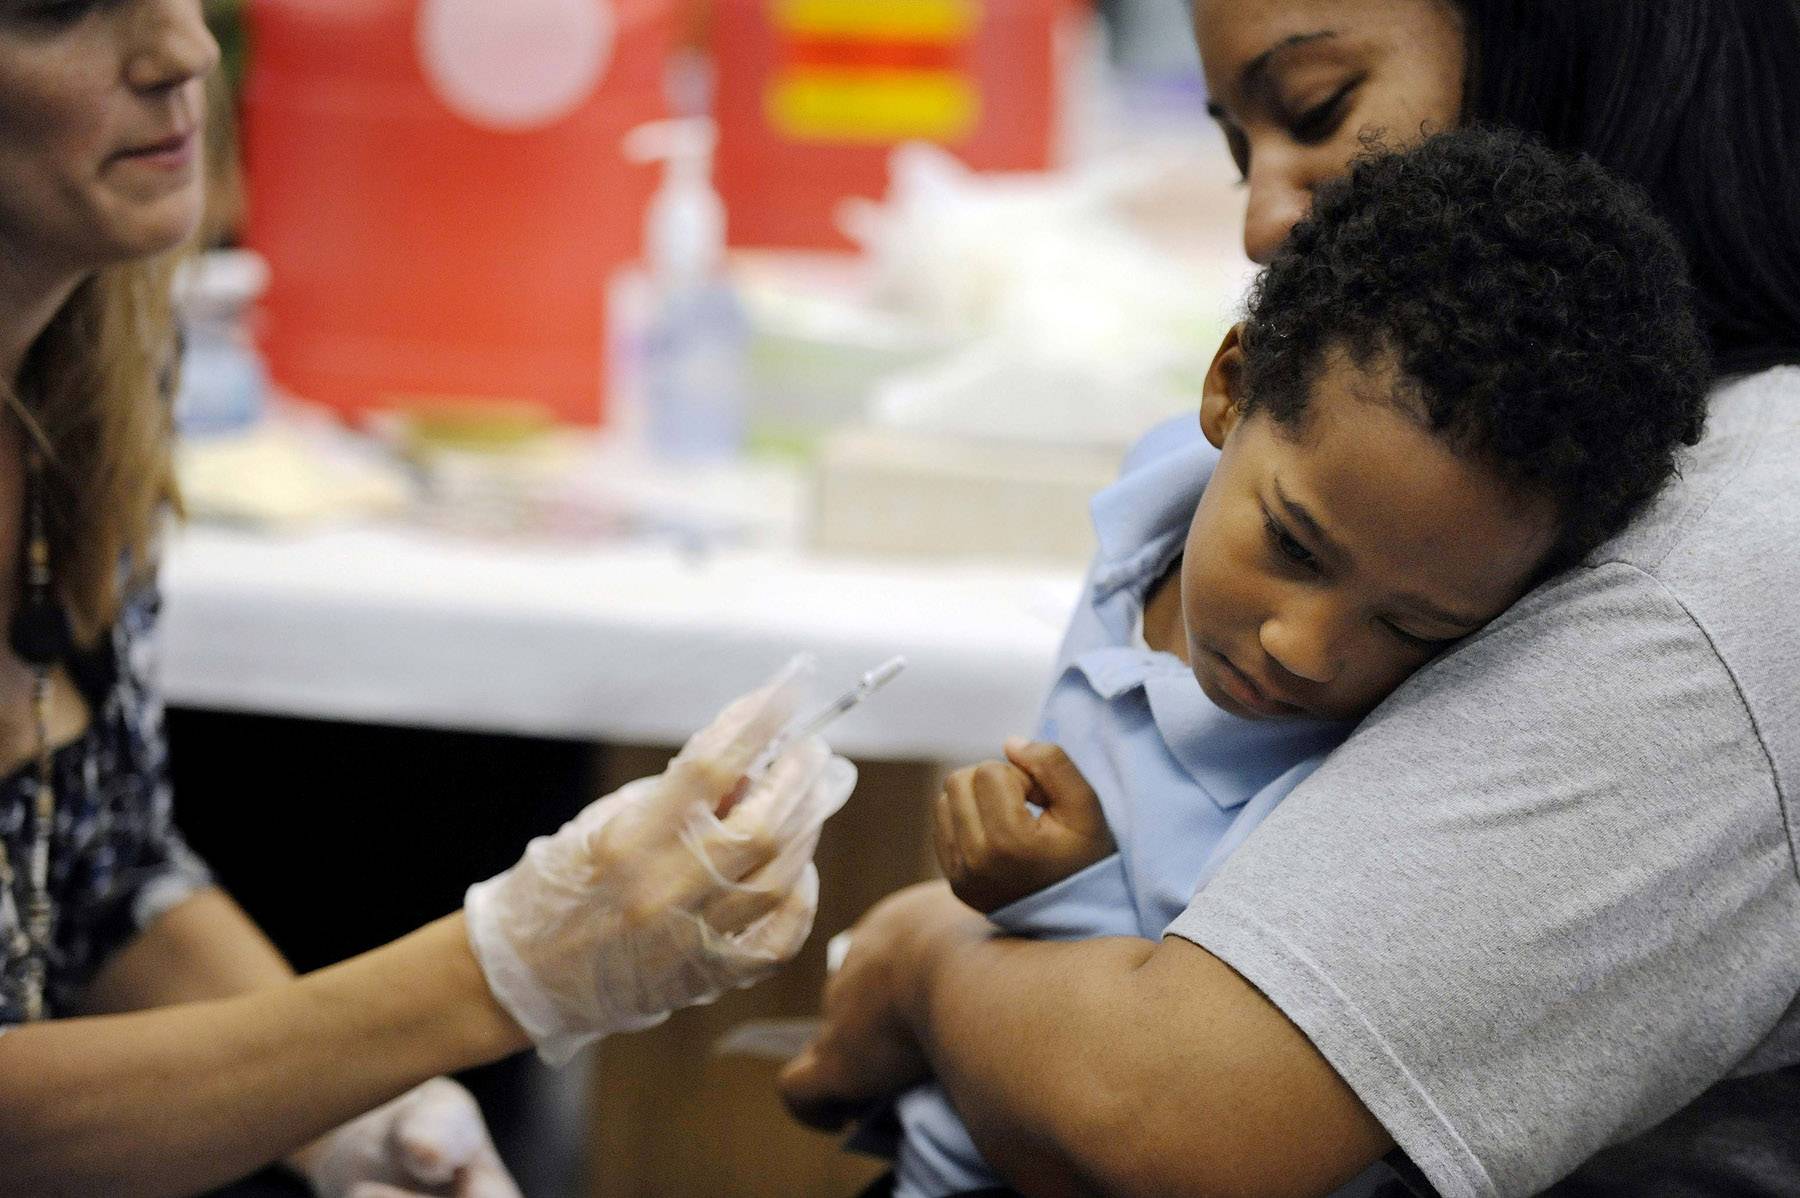 Not Enough Children Vaccinated Against the Flu